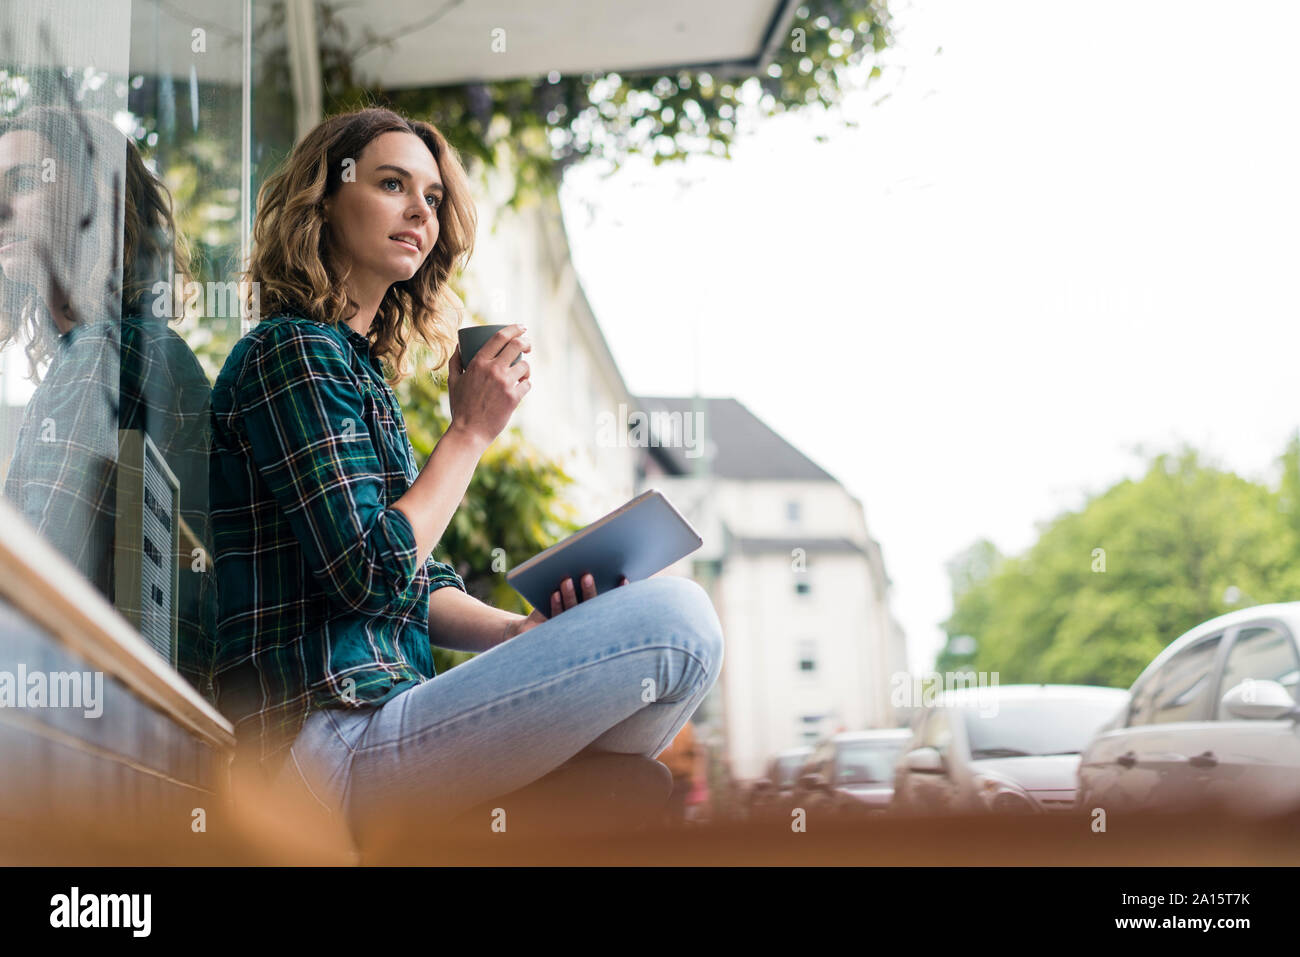 Young woman sitting infront of coffee shop, using digital tablet, drinking coffee Stock Photo